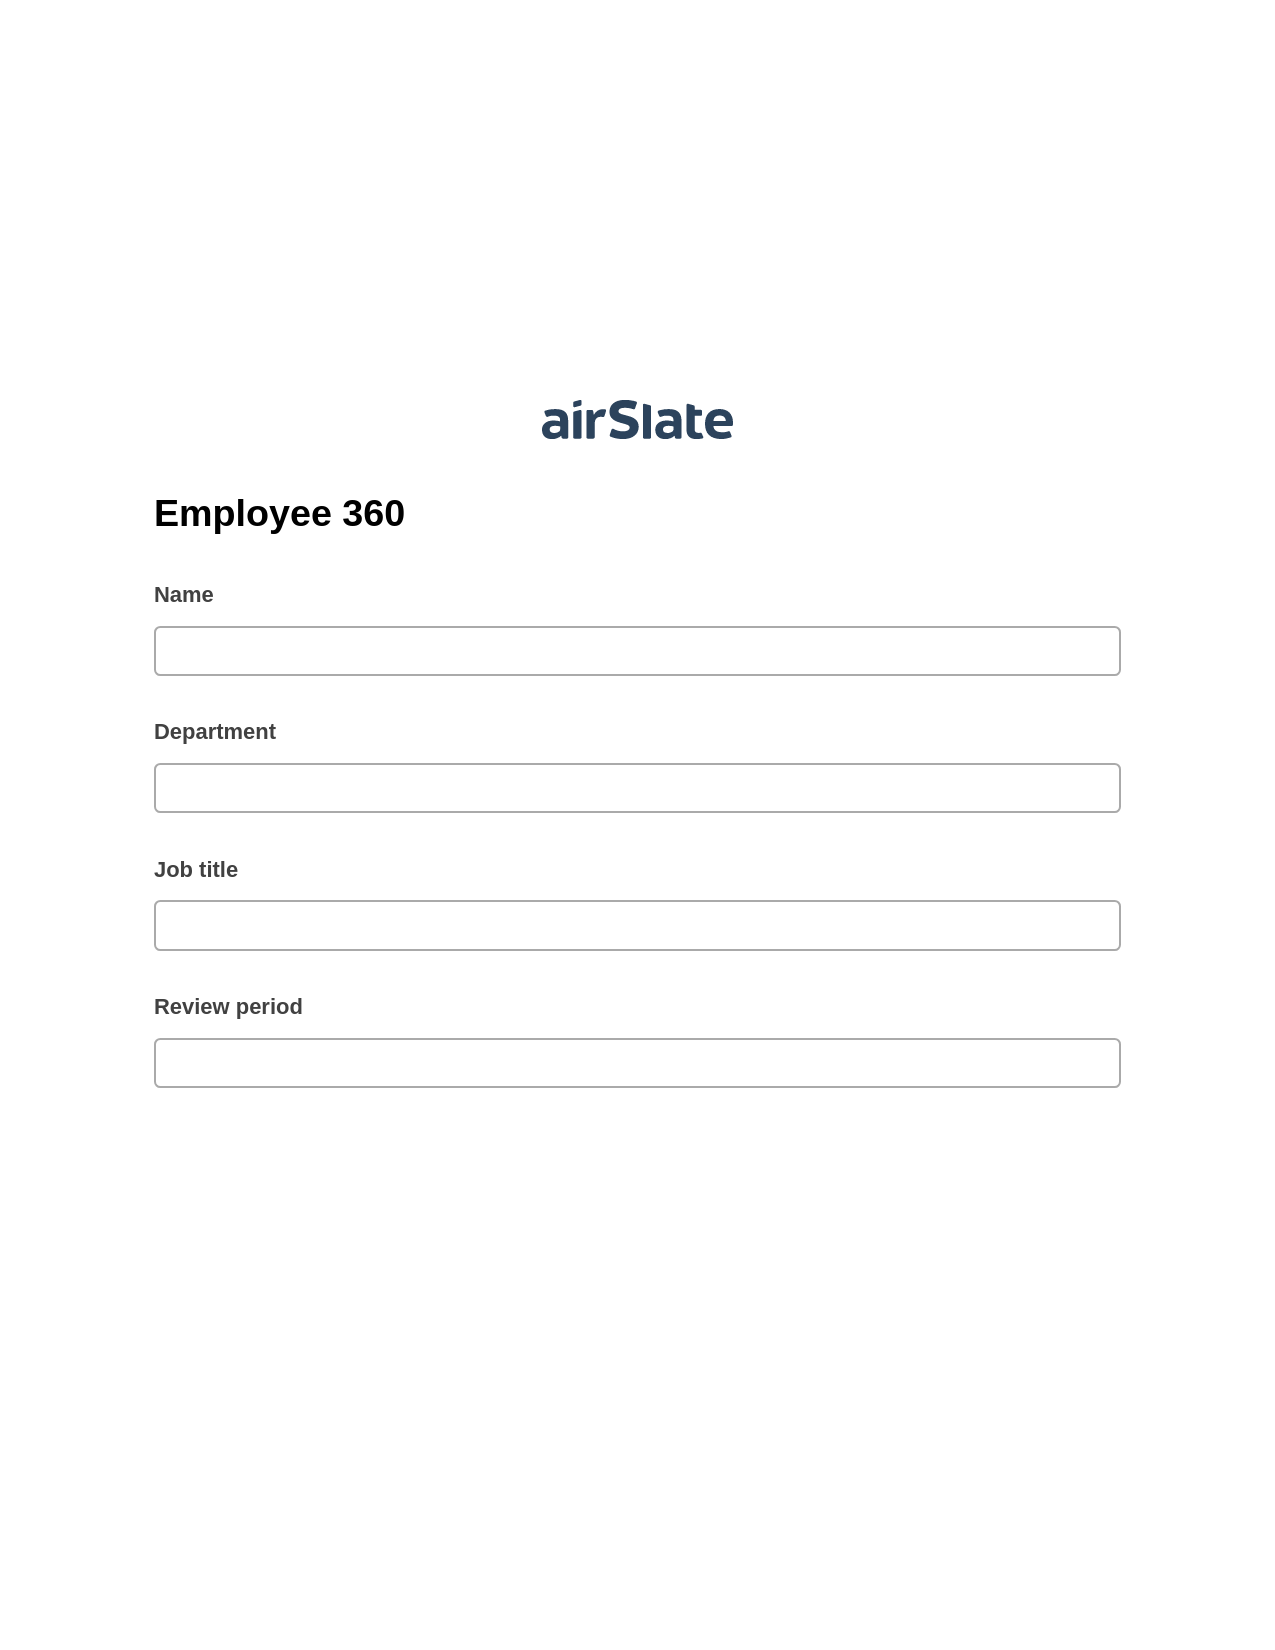 Multirole Employee 360 Pre-fill Document Bot, Update MS Dynamics 365 Record Bot, Export to Excel 365 Bot